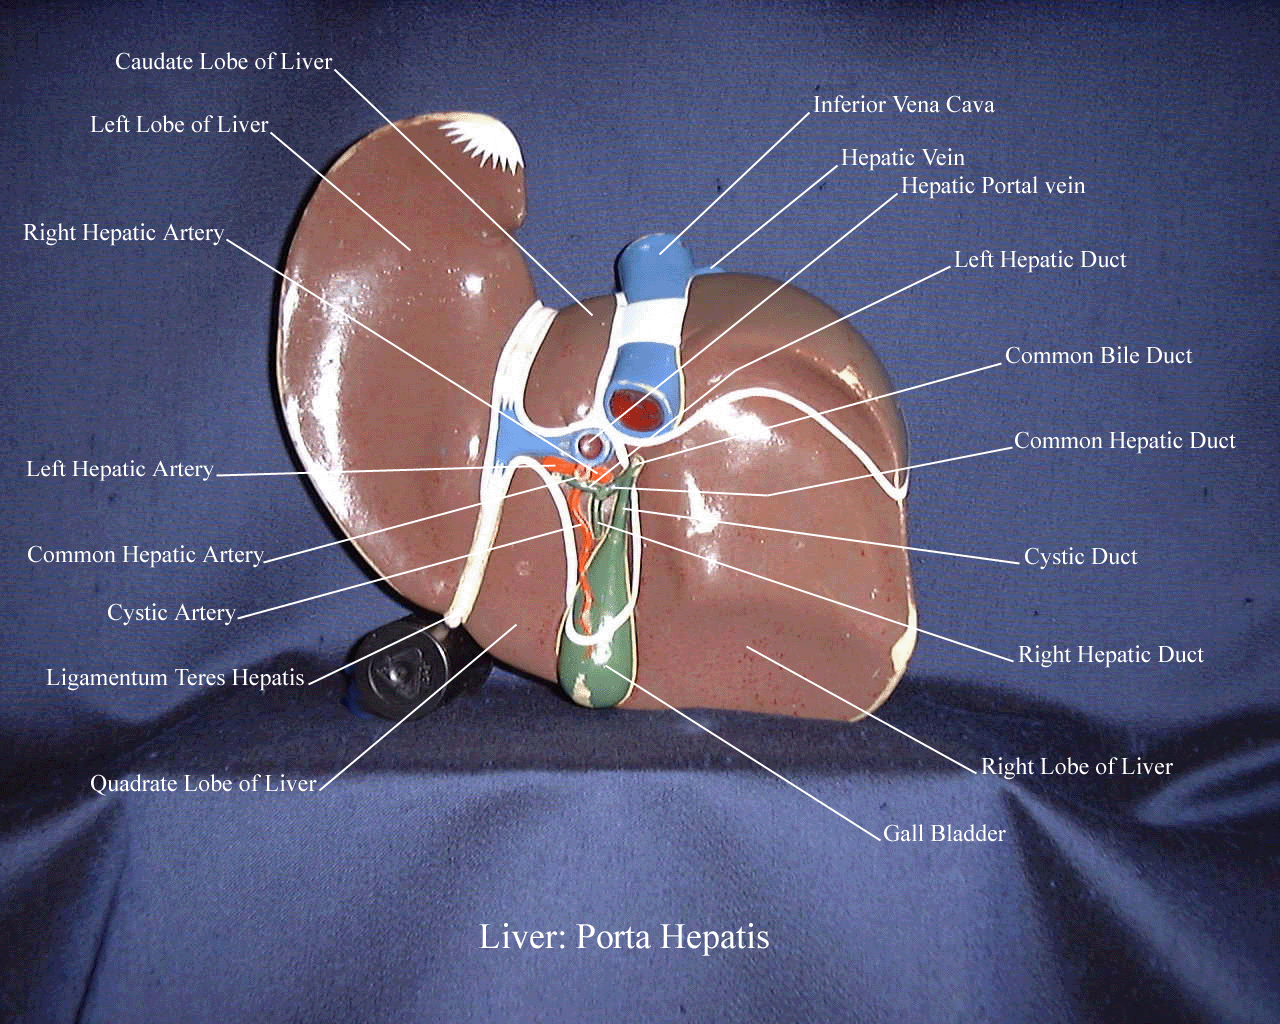 a labeled picture of a liver model from a posterior inferior view